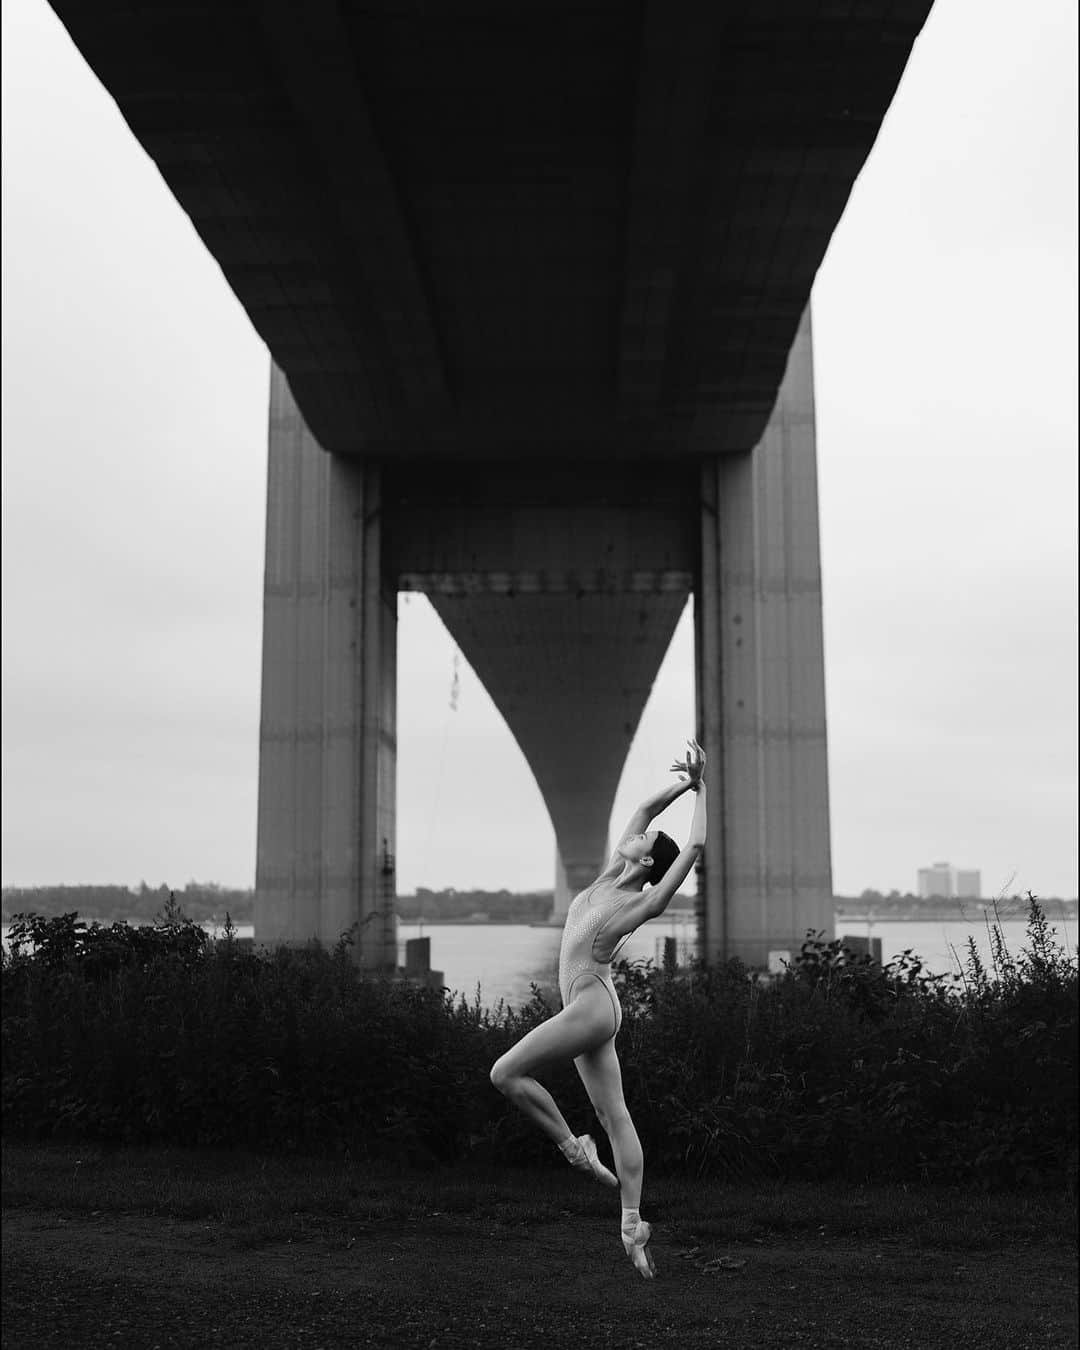 ballerina projectさんのインスタグラム写真 - (ballerina projectInstagram)「𝐒𝐲𝐝𝐧𝐞𝐲 𝐃𝐨𝐥𝐚𝐧 under the Verrazano-Narrows Bridge. 🩰🌁  @sydney_dolan_ballet #sydneydolan #verrazzanobridge #ballerinaproject #newyorkcity #statenisland #ballerina #ballet #dance   Ballerina Project 𝗹𝗮𝗿𝗴𝗲 𝗳𝗼𝗿𝗺𝗮𝘁 𝗹𝗶𝗺𝗶𝘁𝗲𝗱 𝗲𝗱𝘁𝗶𝗼𝗻 𝗽𝗿𝗶𝗻𝘁𝘀 and 𝗜𝗻𝘀𝘁𝗮𝘅 𝗰𝗼𝗹𝗹𝗲𝗰𝘁𝗶𝗼𝗻𝘀 on sale in our Etsy store. Link is located in our bio.  𝙎𝙪𝙗𝙨𝙘𝙧𝙞𝙗𝙚 to the 𝐁𝐚𝐥𝐥𝐞𝐫𝐢𝐧𝐚 𝐏𝐫𝐨𝐣𝐞𝐜𝐭 on Instagram to have access to exclusive and never seen before content.」5月3日 21時19分 - ballerinaproject_